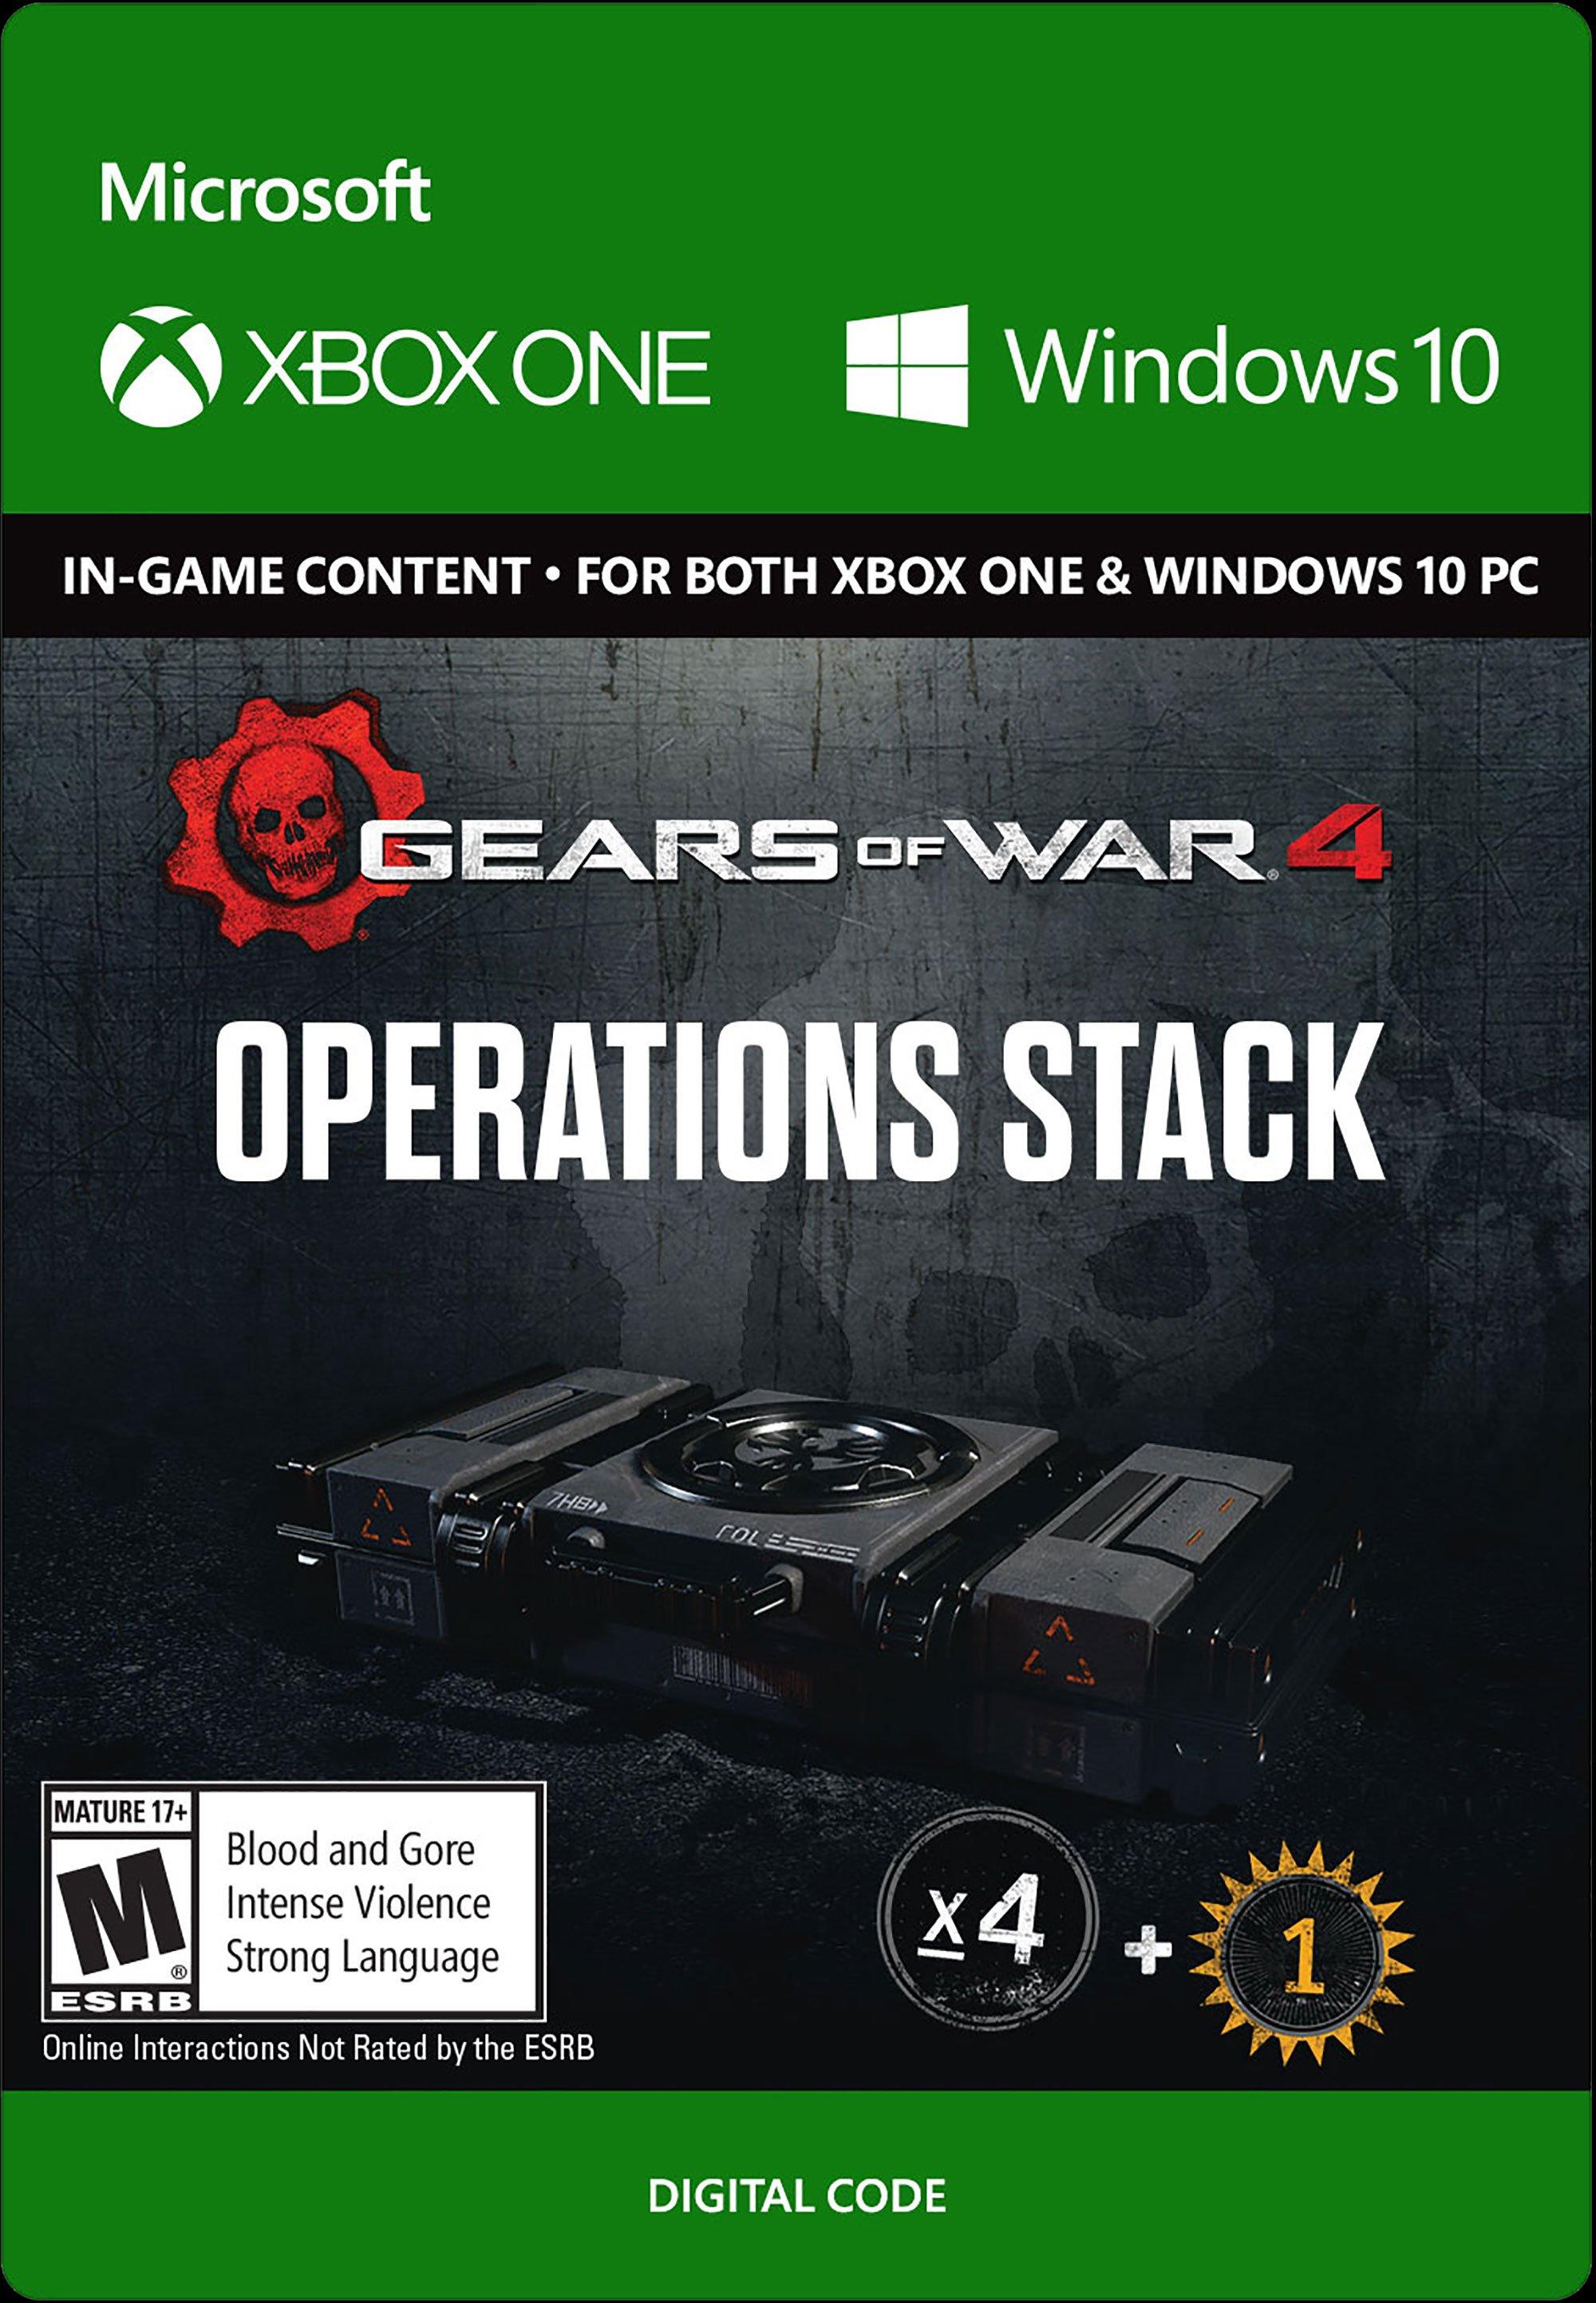 Gears of War 4: Operations Stack DLC - Xbox One, Digital